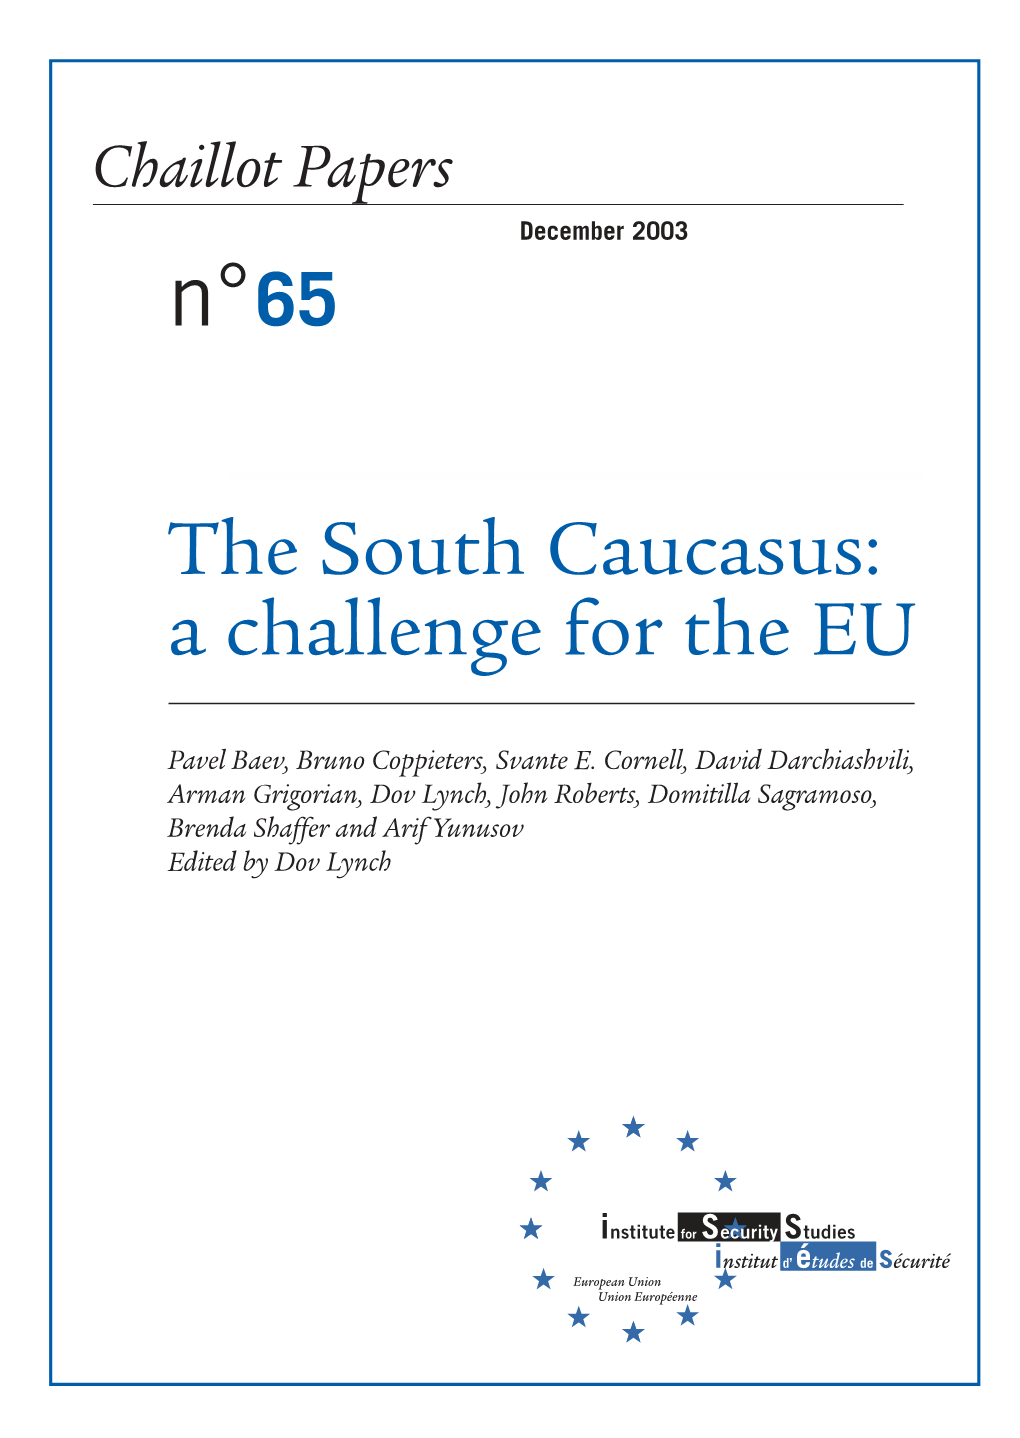 The South Caucasus: a Challenge for the EU